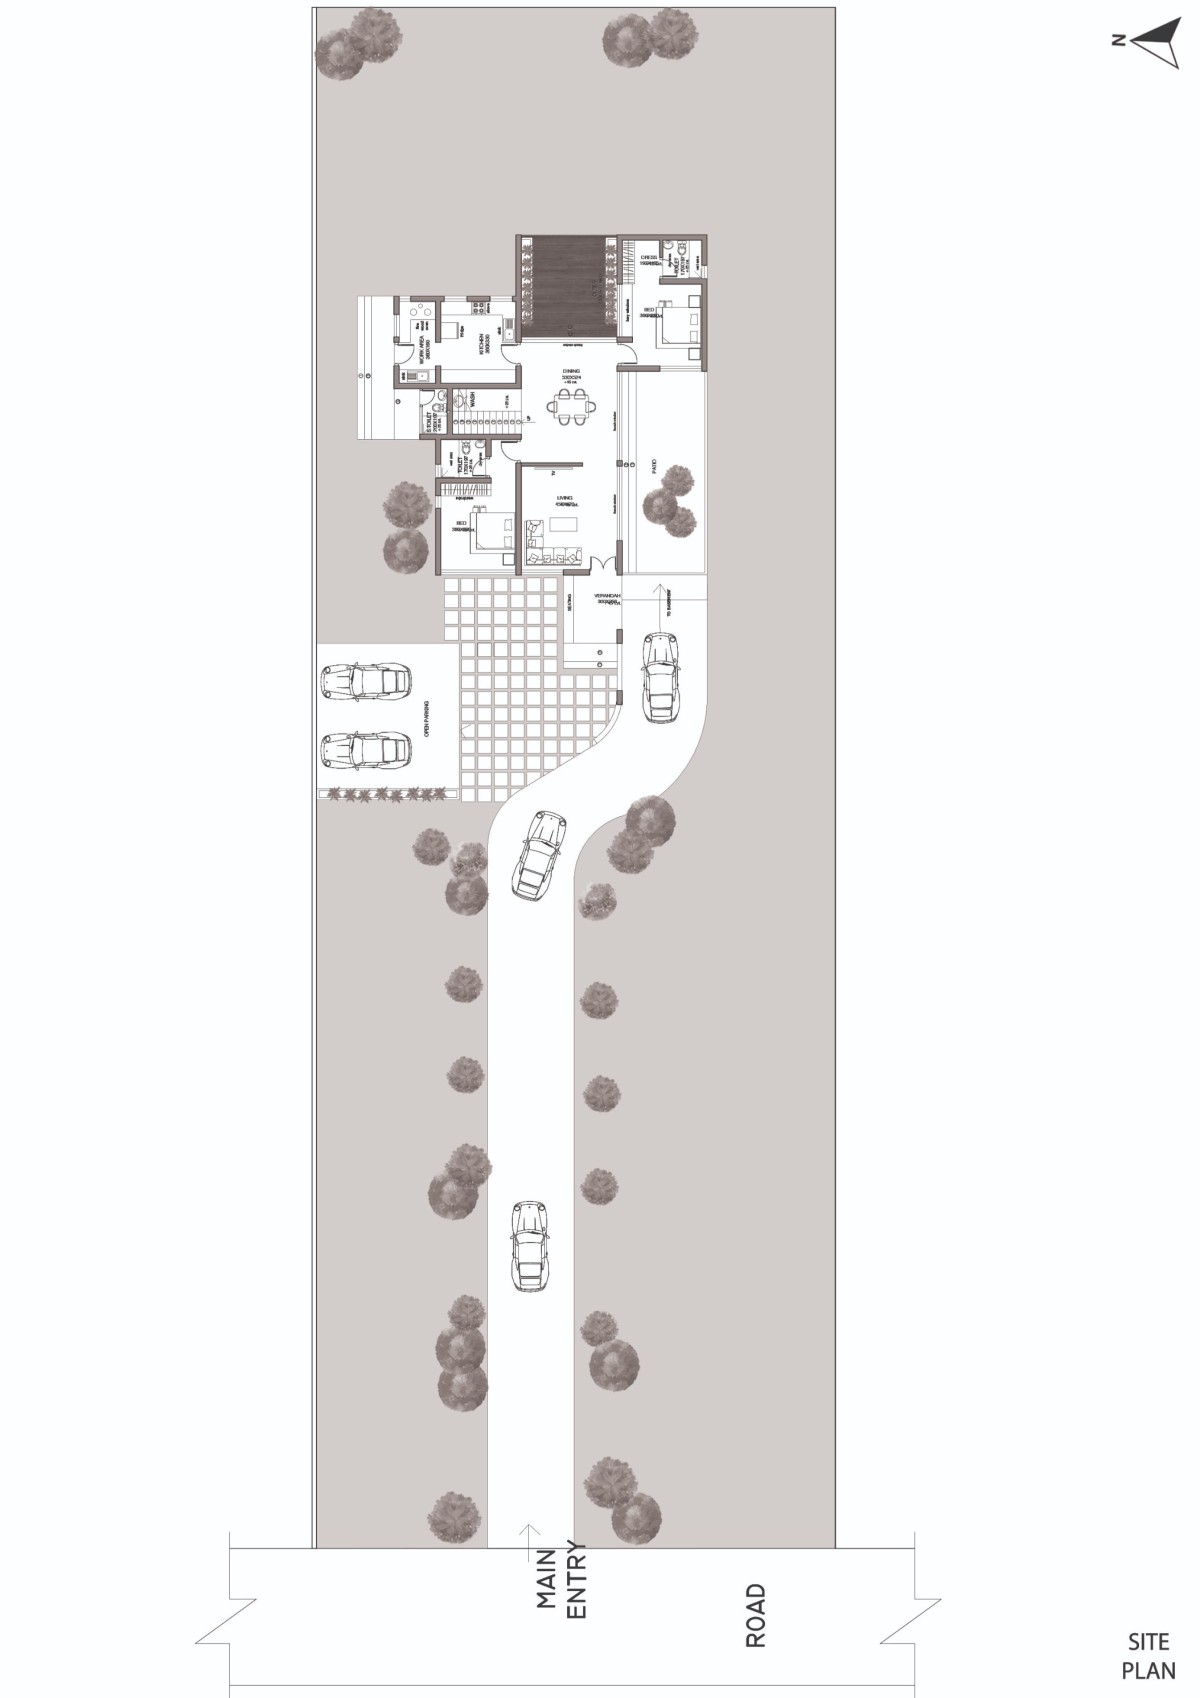 Site Plan of The Levelscape by Nestcraft Architecture